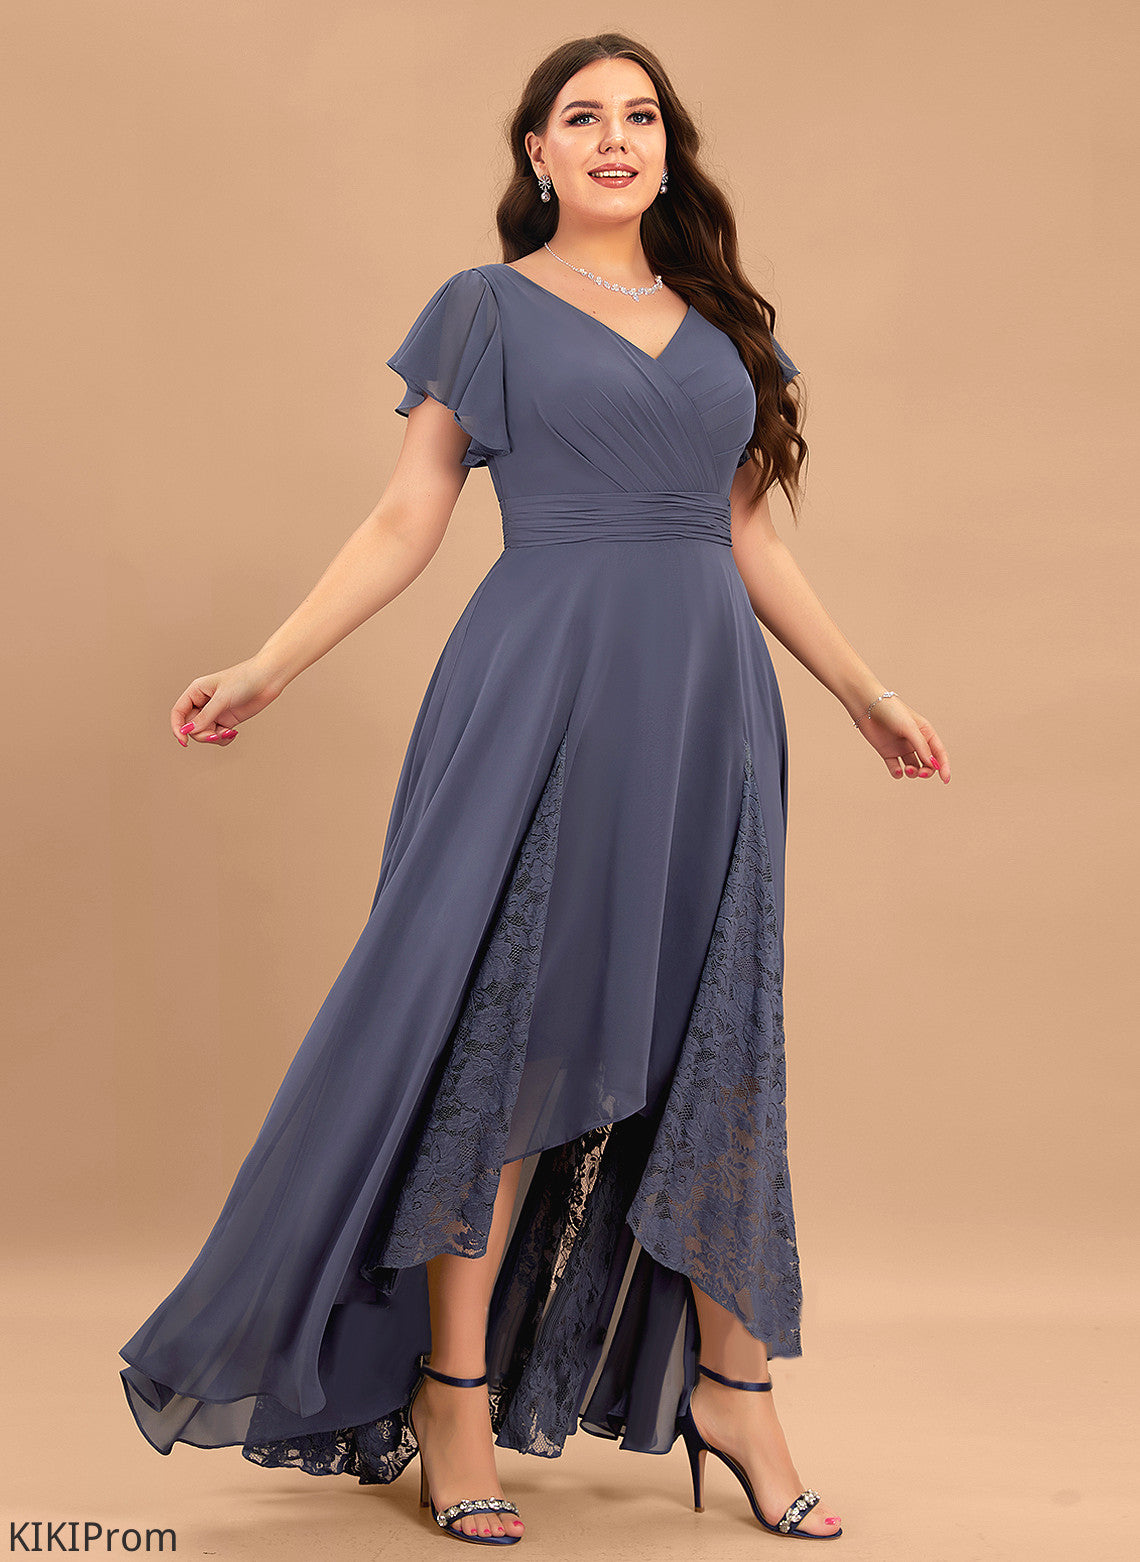 Dress Chiffon Lace With Asymmetrical A-Line Taniyah V-neck Ruffle Cocktail Cocktail Dresses